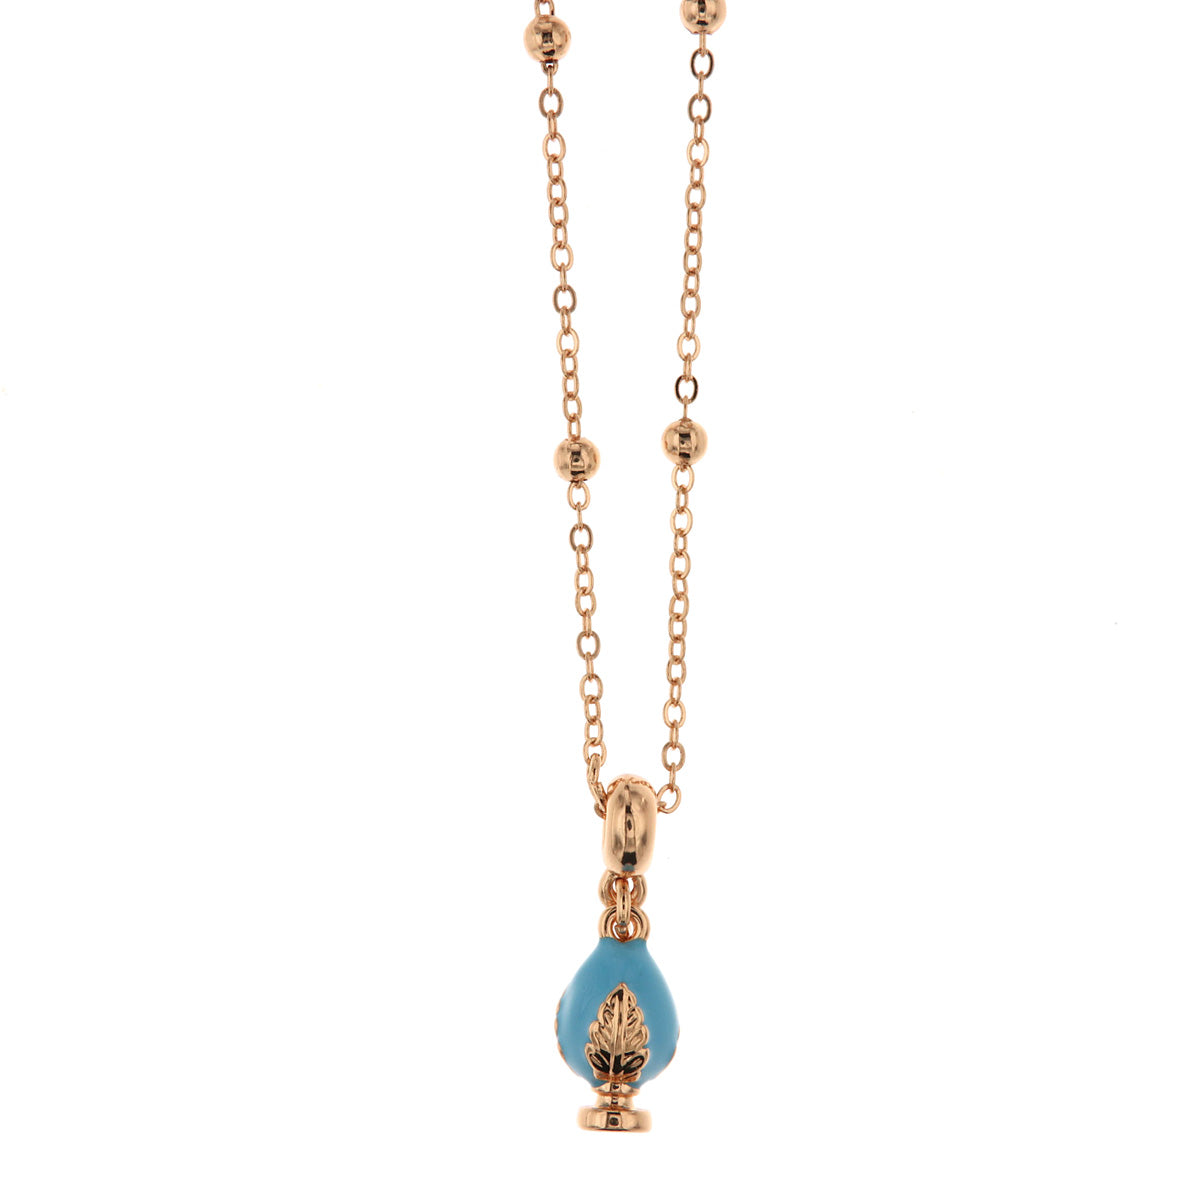 Metal necklace with turquoise lucky pyum